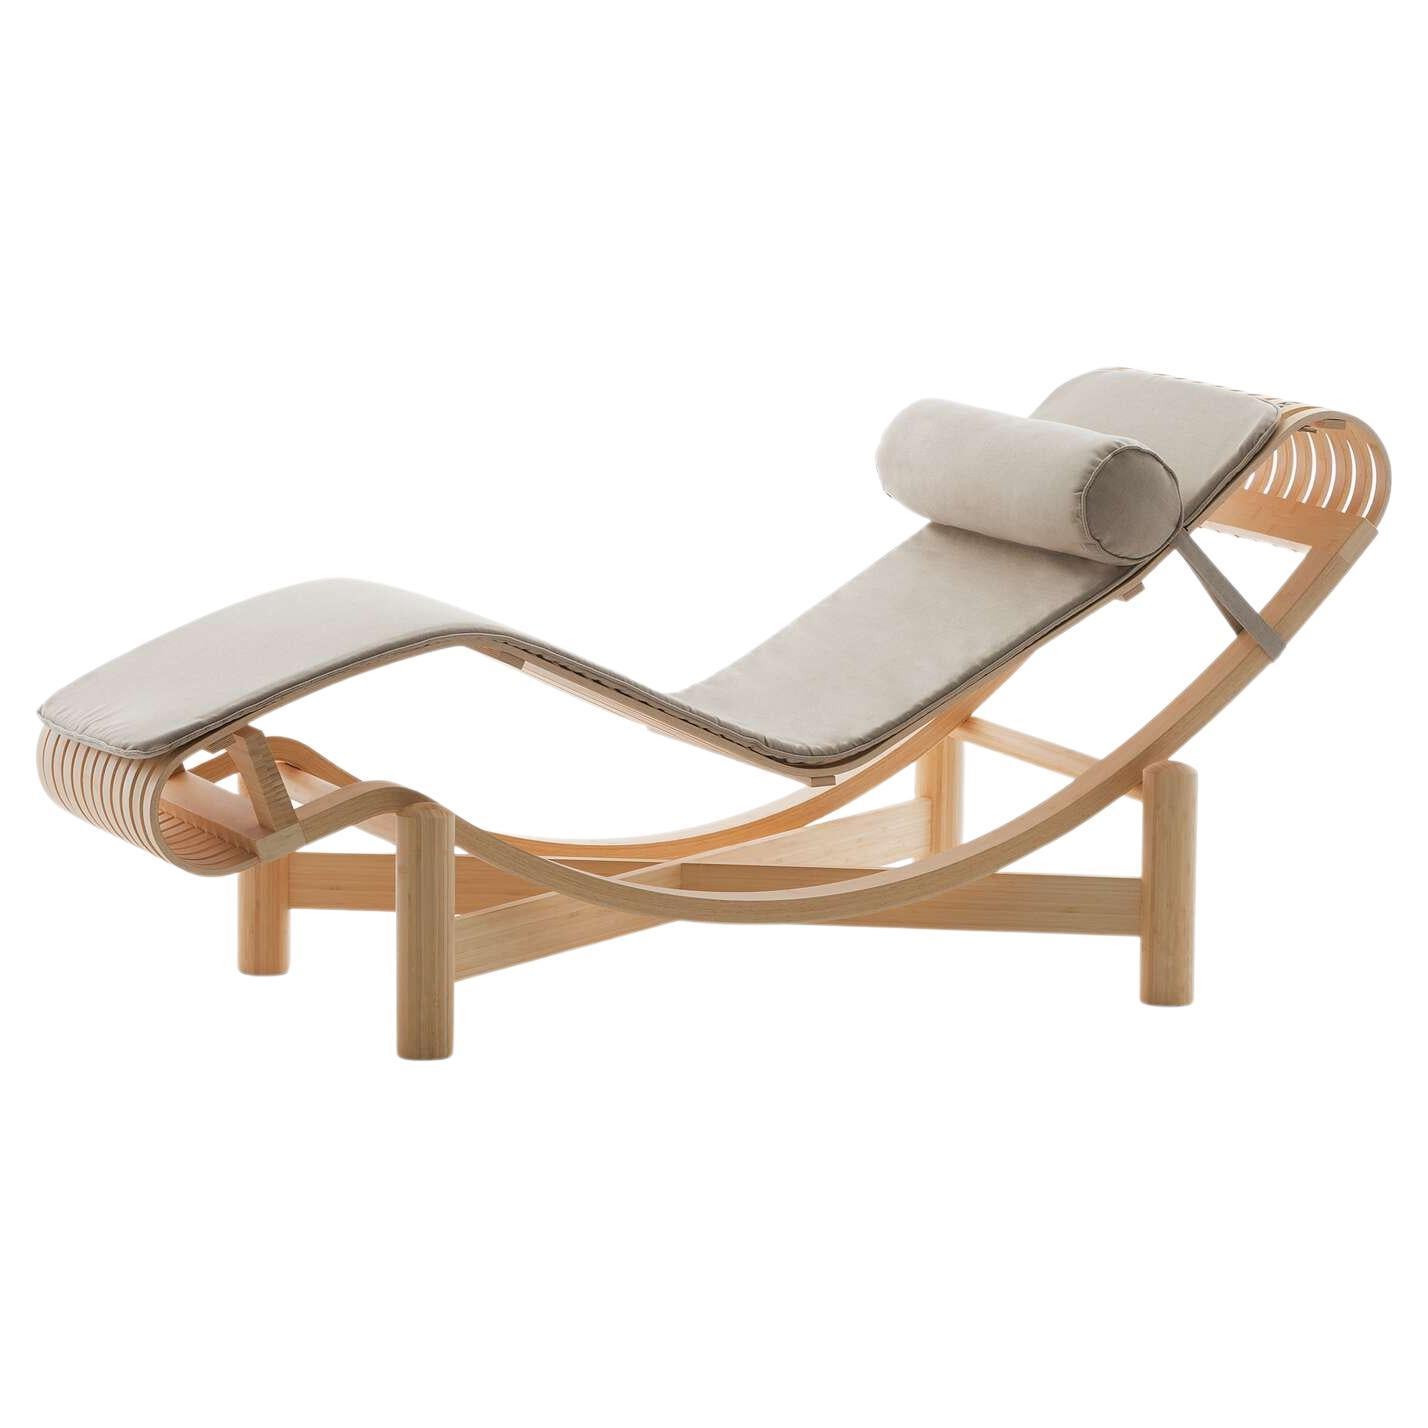 Charlotte Perriand Tokyo Chaise Longue for Cassina, Italy, new